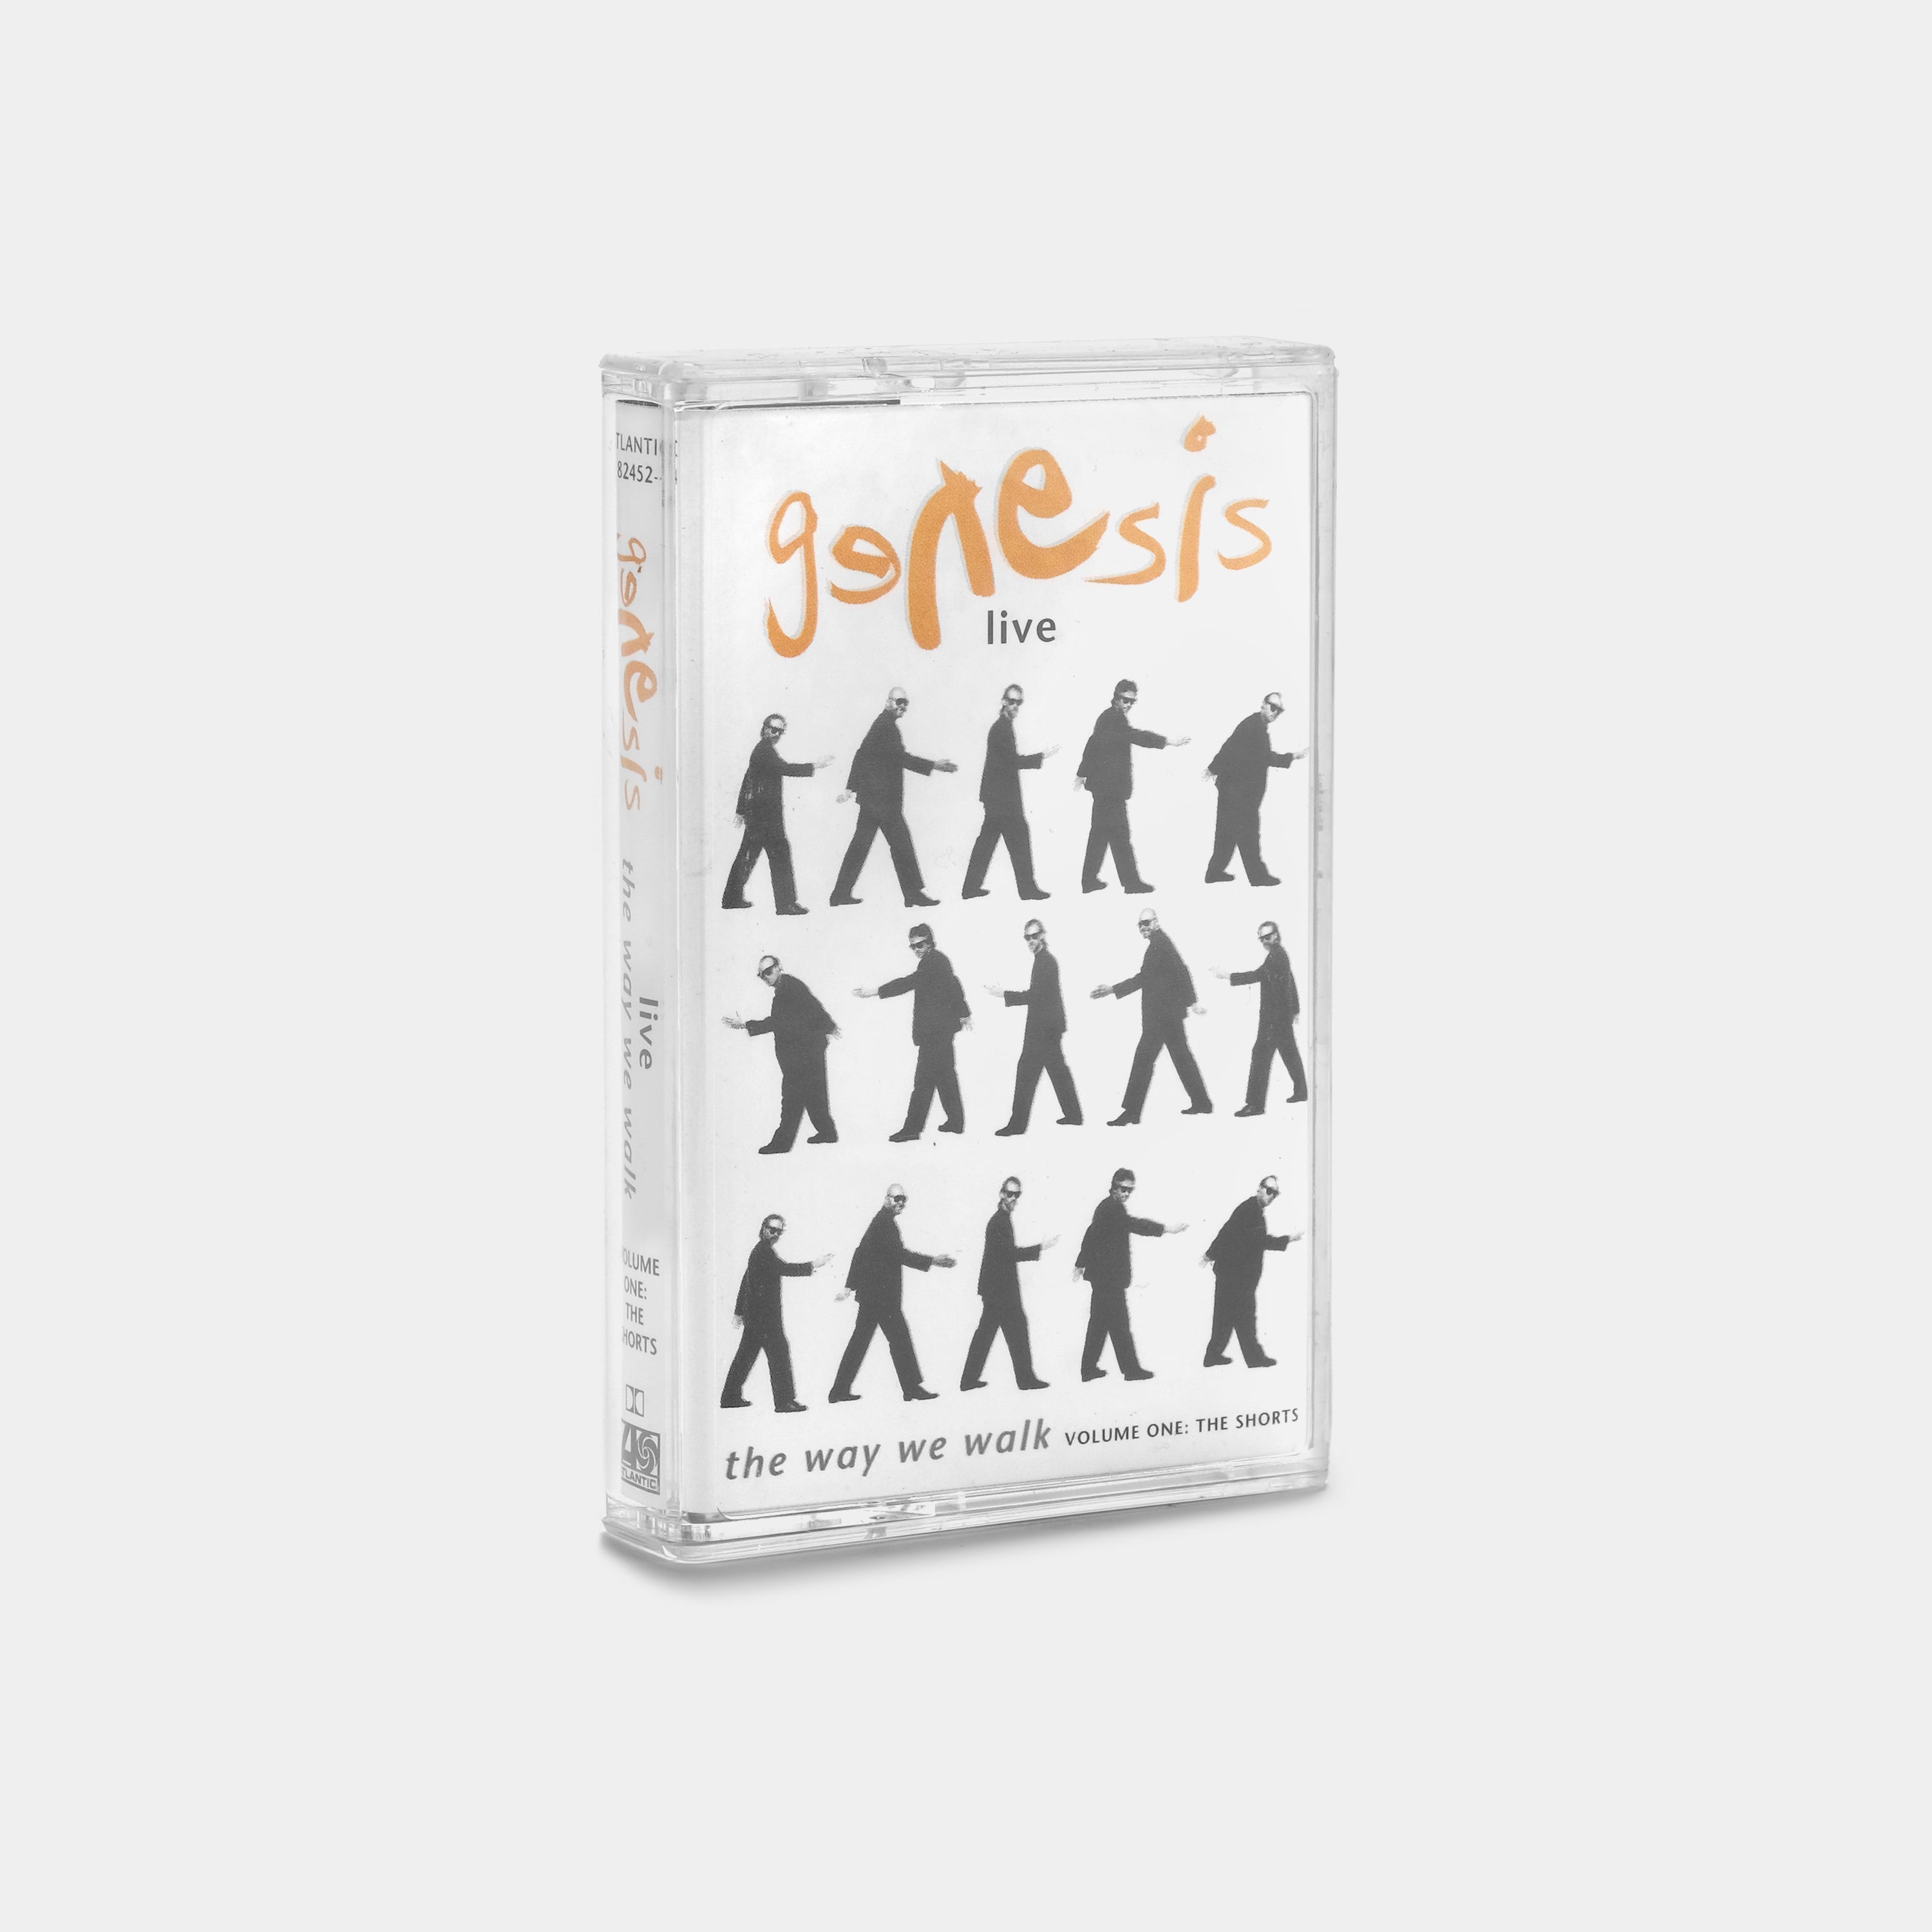 Genesis - Live / The Way We Walk (Volume One: The Shorts) Cassette Tape